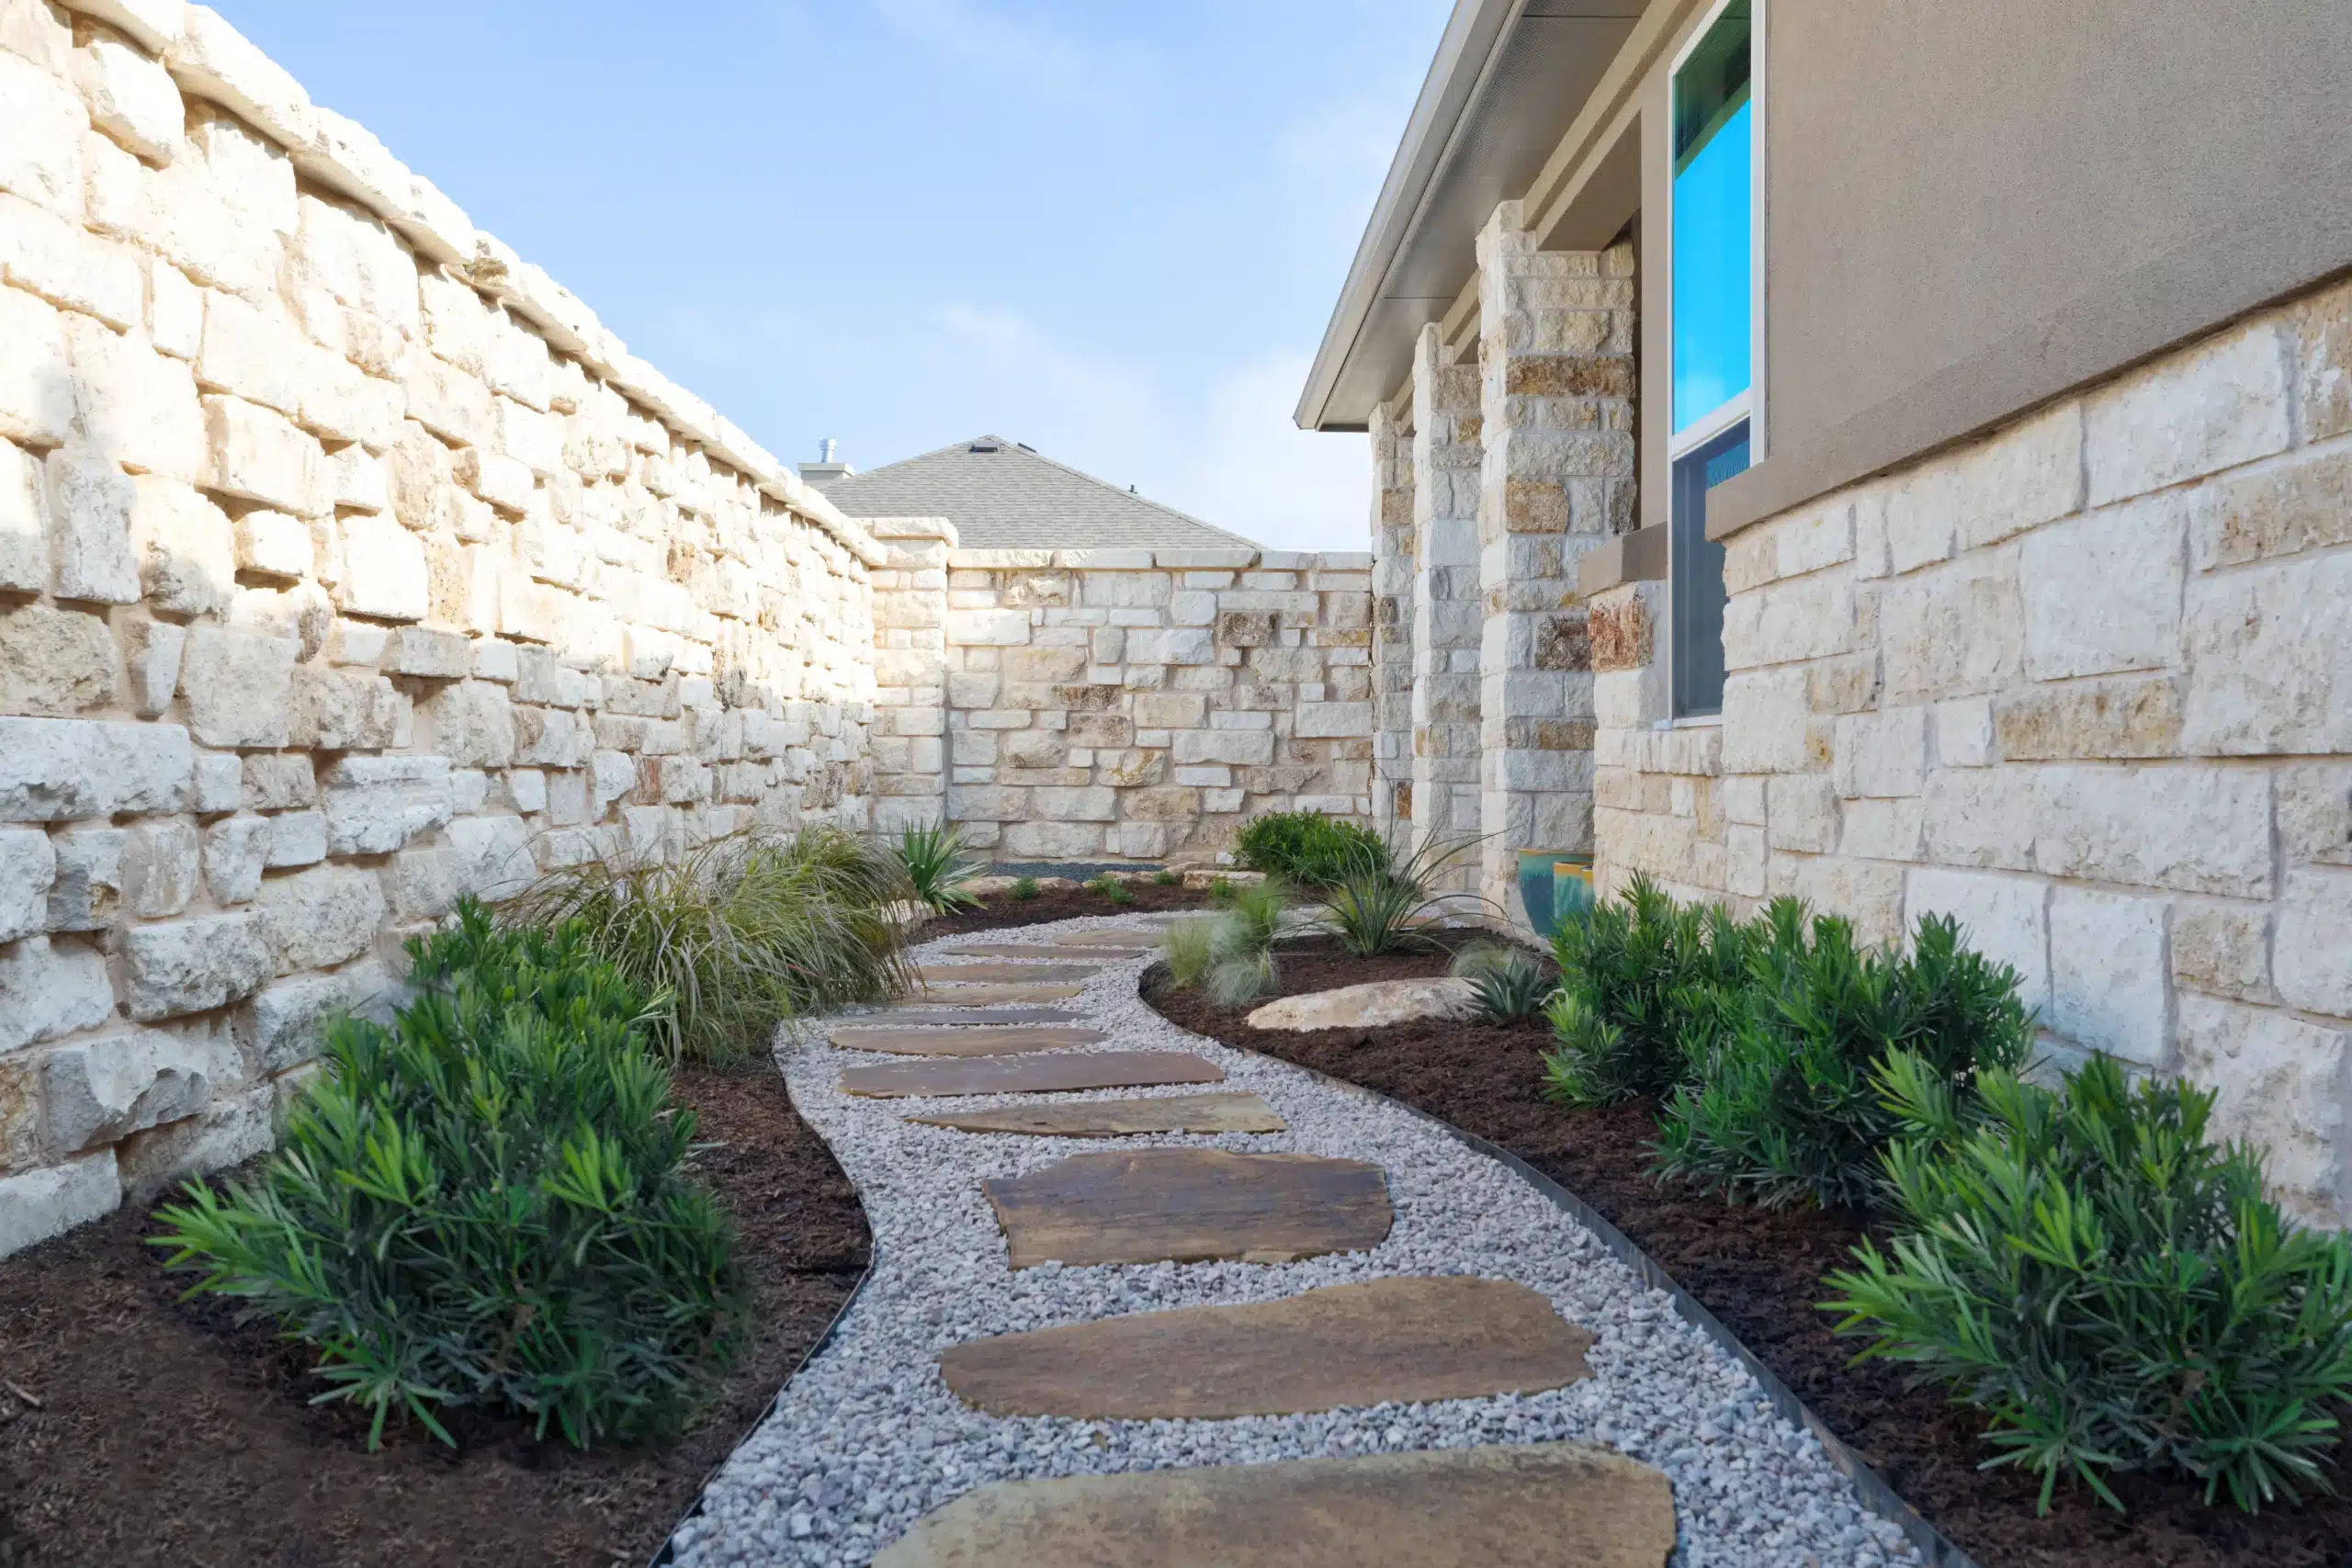 view of walkway with natural stone steps and gravel with mulch beds along the side and green shrubs in Central Texas